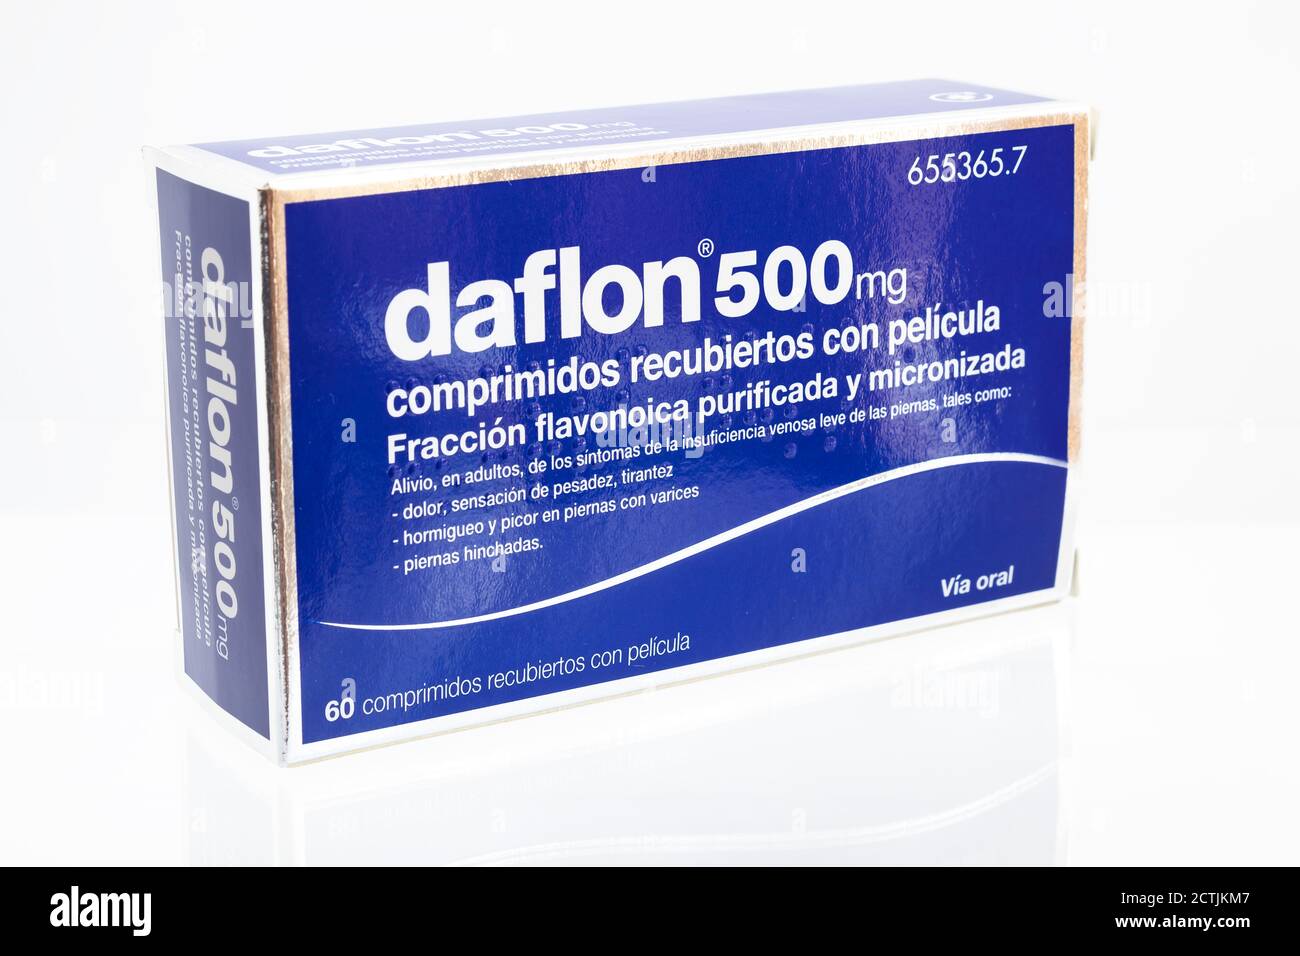 Huelva, Spanien-September 23,2020: Spanish Box of Daflon coated Tablets, a micronized purified flavonoid fraction consting Diosmin and other flavonoid Stockfoto